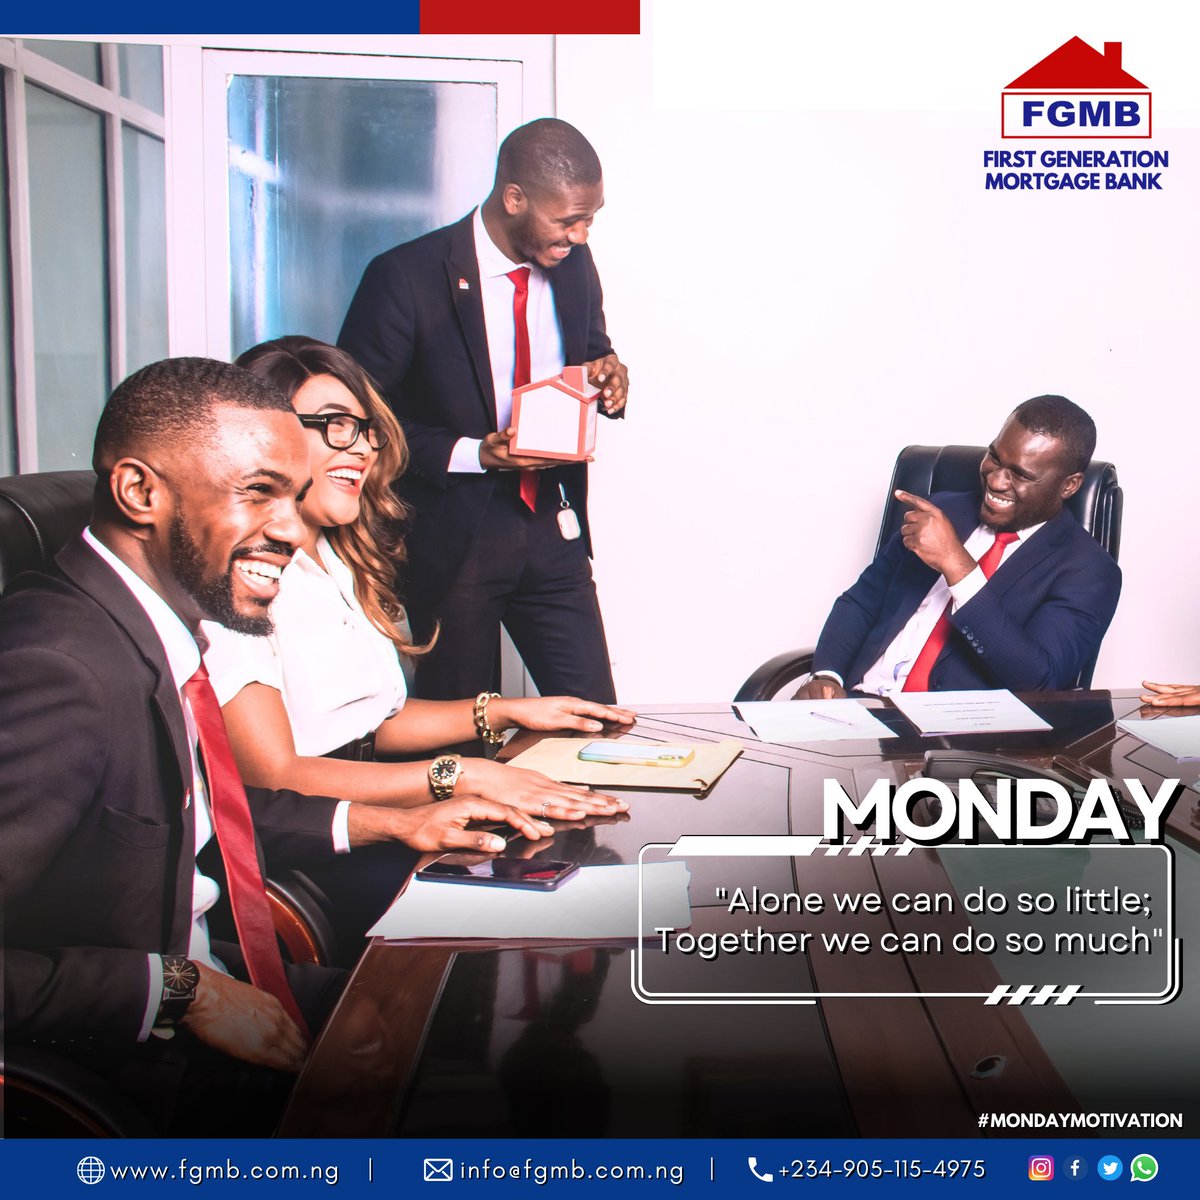 It's a new week. Together we can make your Homeownership dreams a reality.👍🏽 #teamworkmakesthedreamwork

#fgmb #mondaymotivation #team #teamwork #excellence #together #mortgagebank #mortgageservices #MondayMood